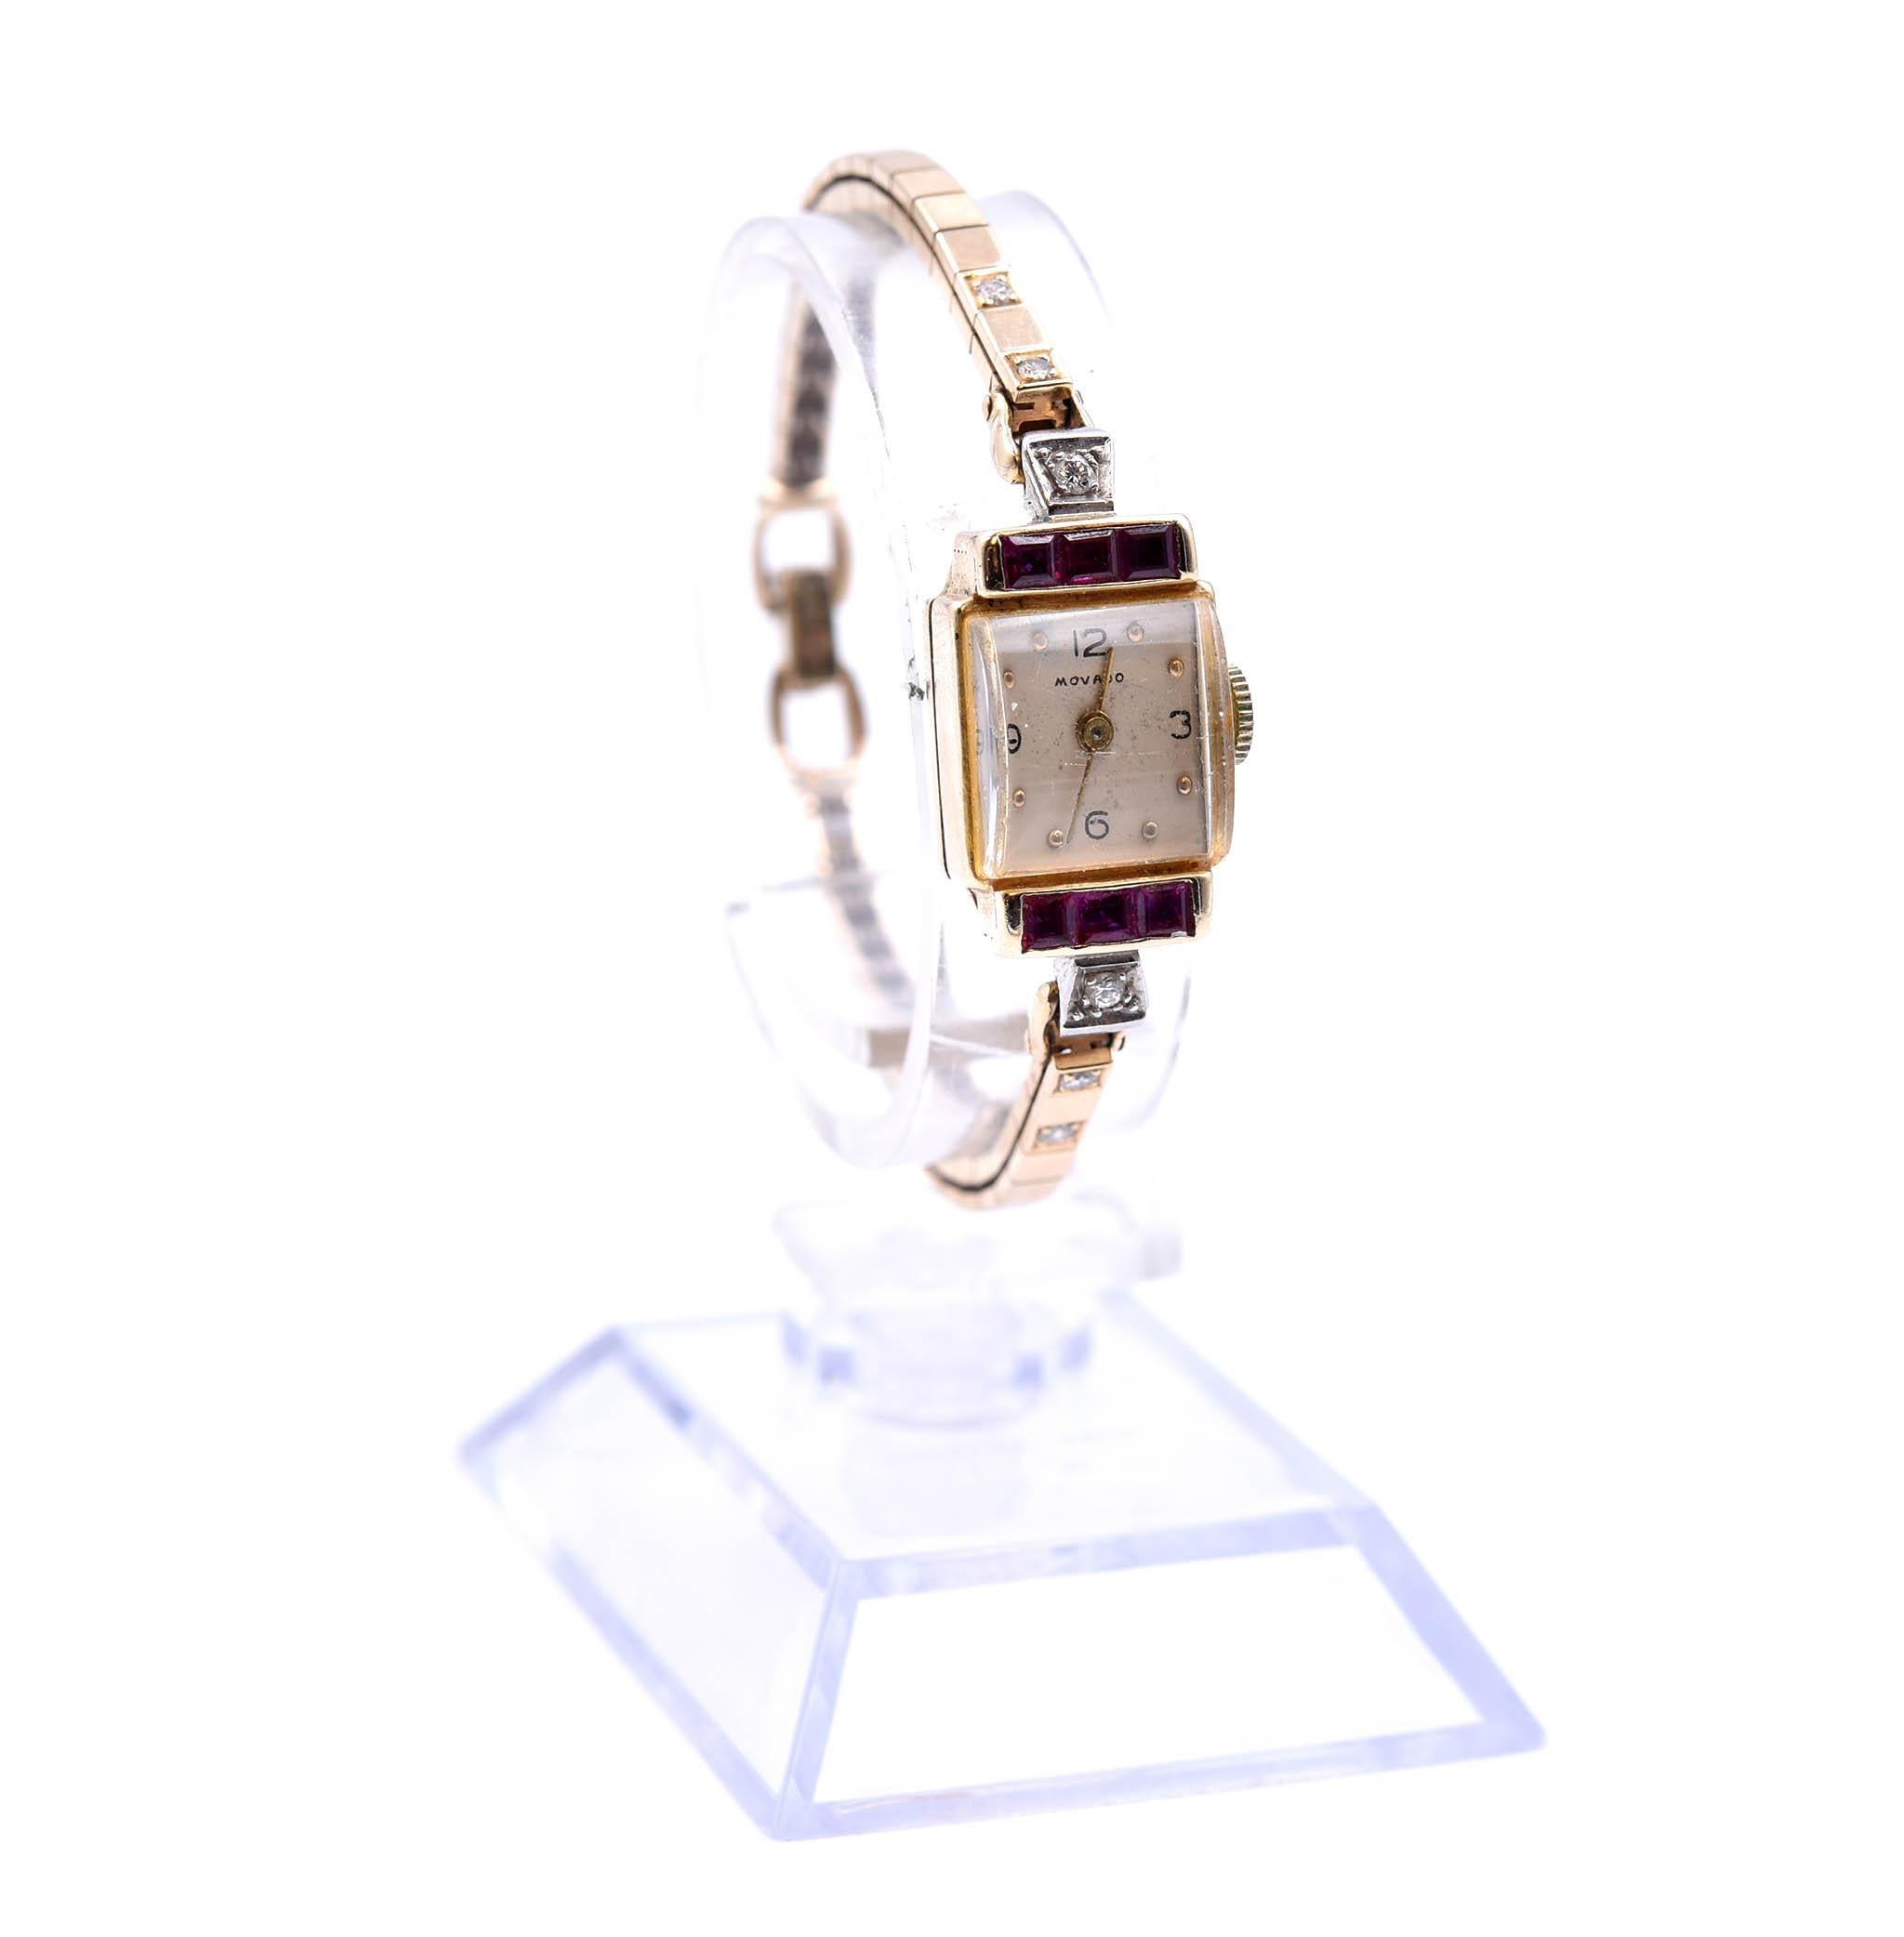 Movement: manual wind 17 jewels
Function: hours, minutes
Case: rectangle 19.66mm by 12.82mm 14k yellow gold case with diamond bezel, plastic crystal, pull/push crown
Dial: white dial with Arabic numbers, gold toned hands 
Bracelet: 14k yellow gold